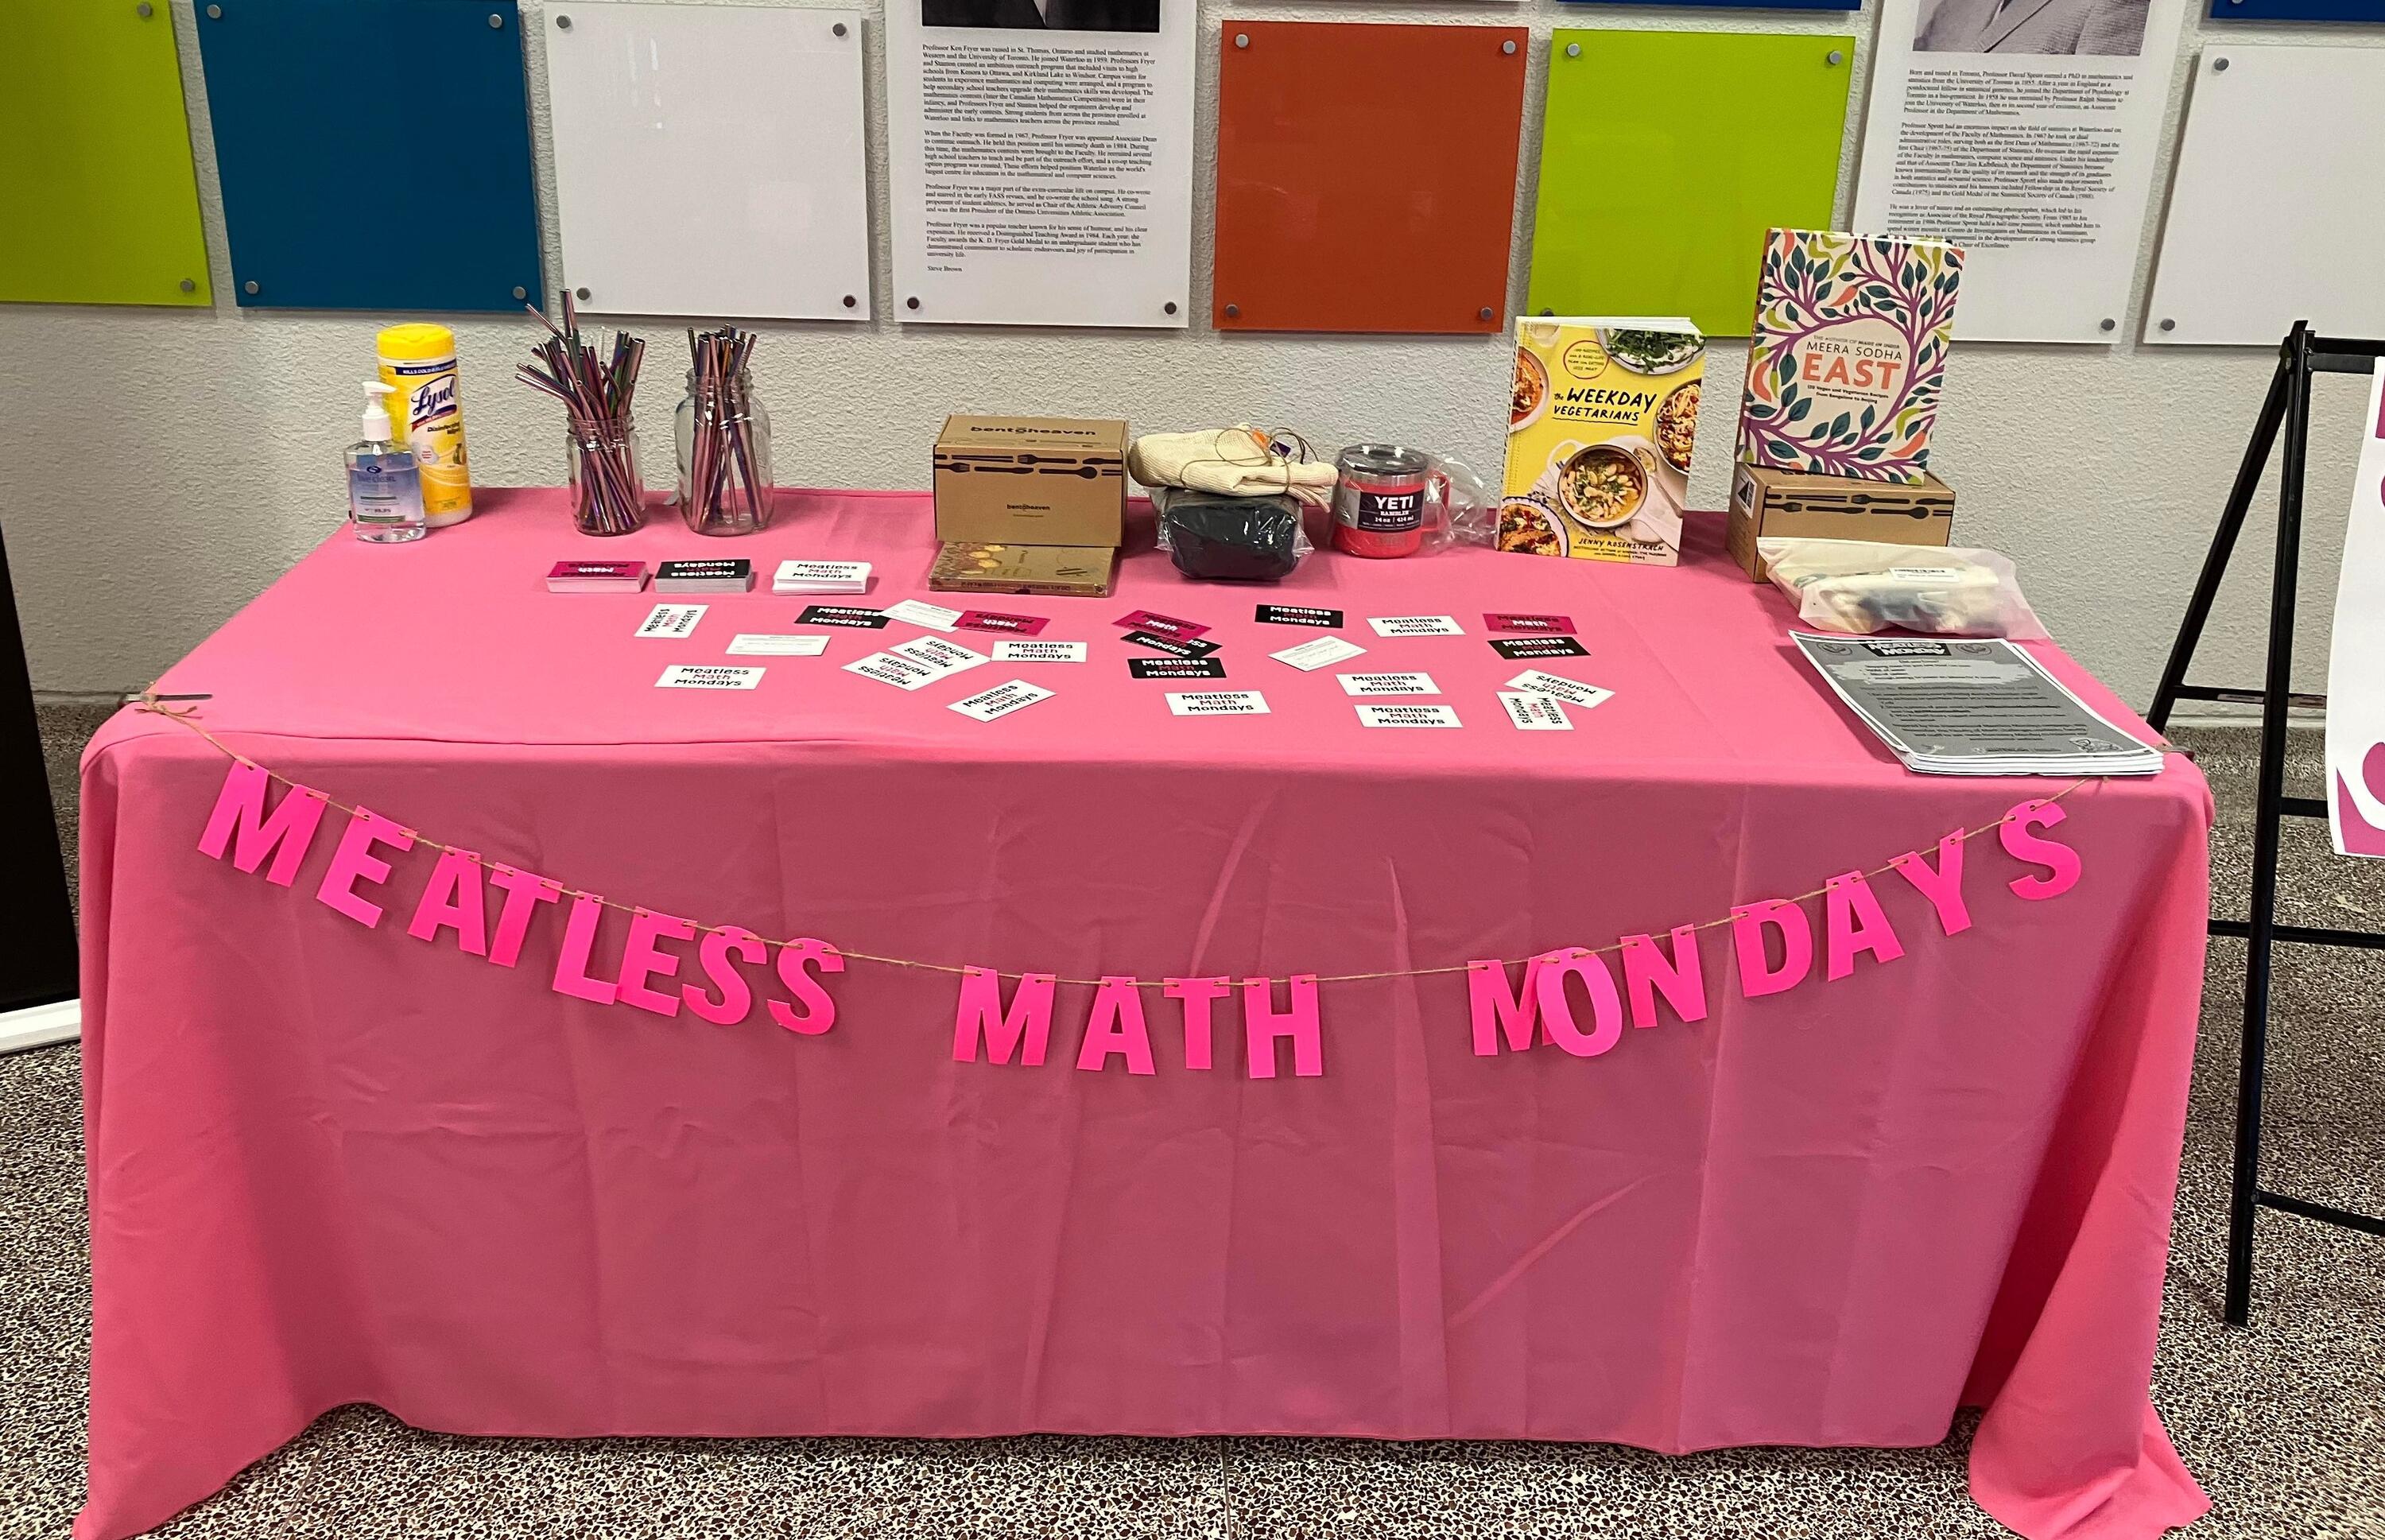 A pink table covered in prizes and information sheets with a banner reading "Meatless Math Mondays"